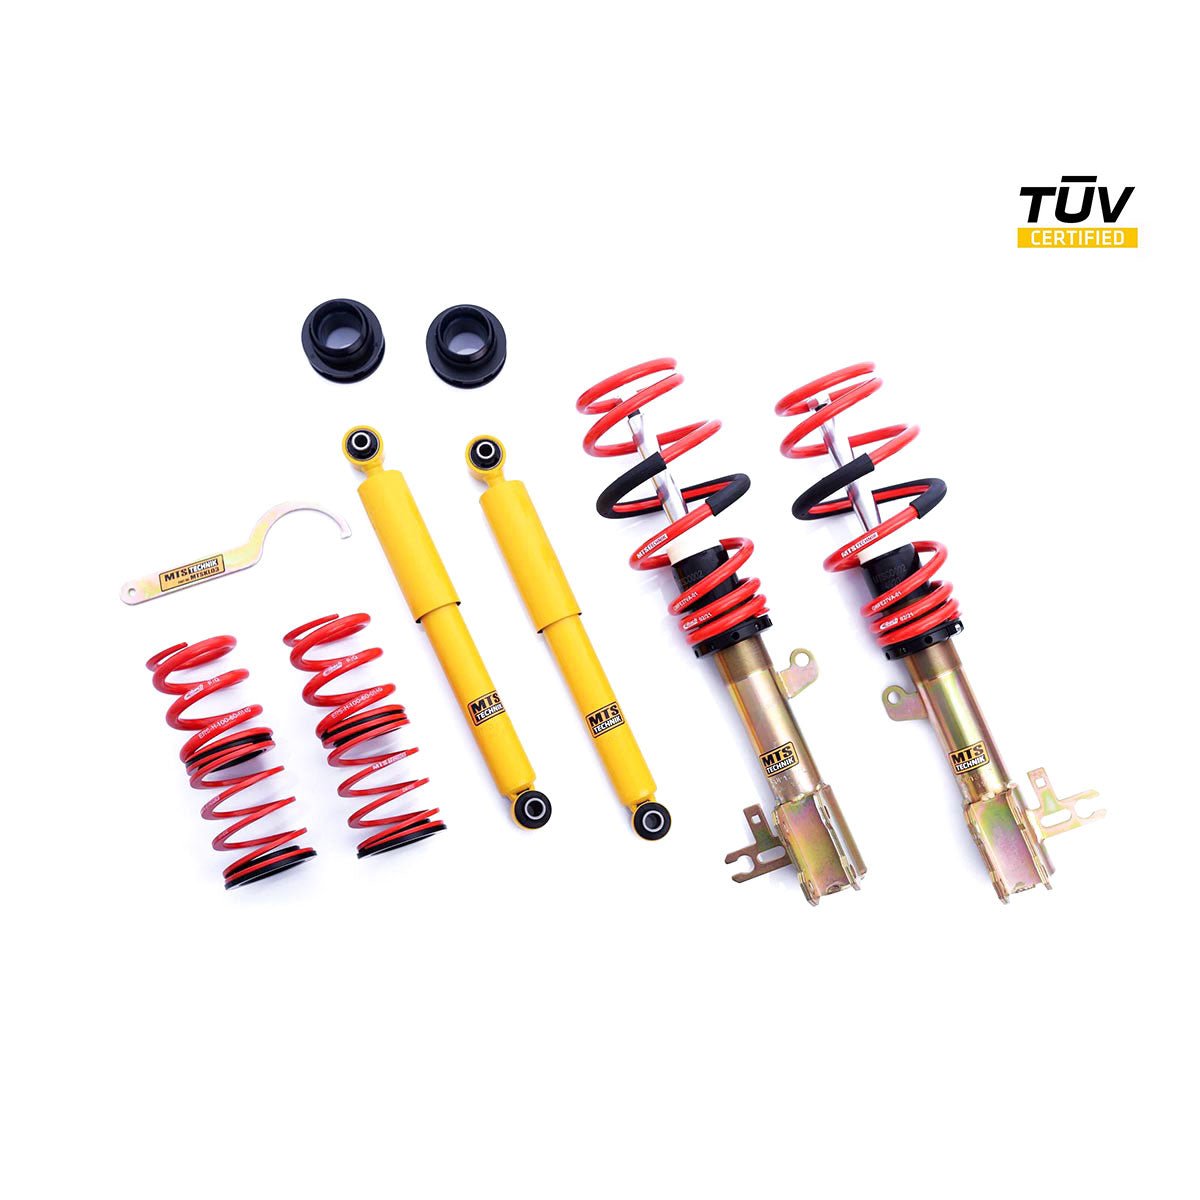 MTS TECHNIK coilover kit SPORT Opel Astra H Twintop (with TÜV) - PARTS33 GmbH